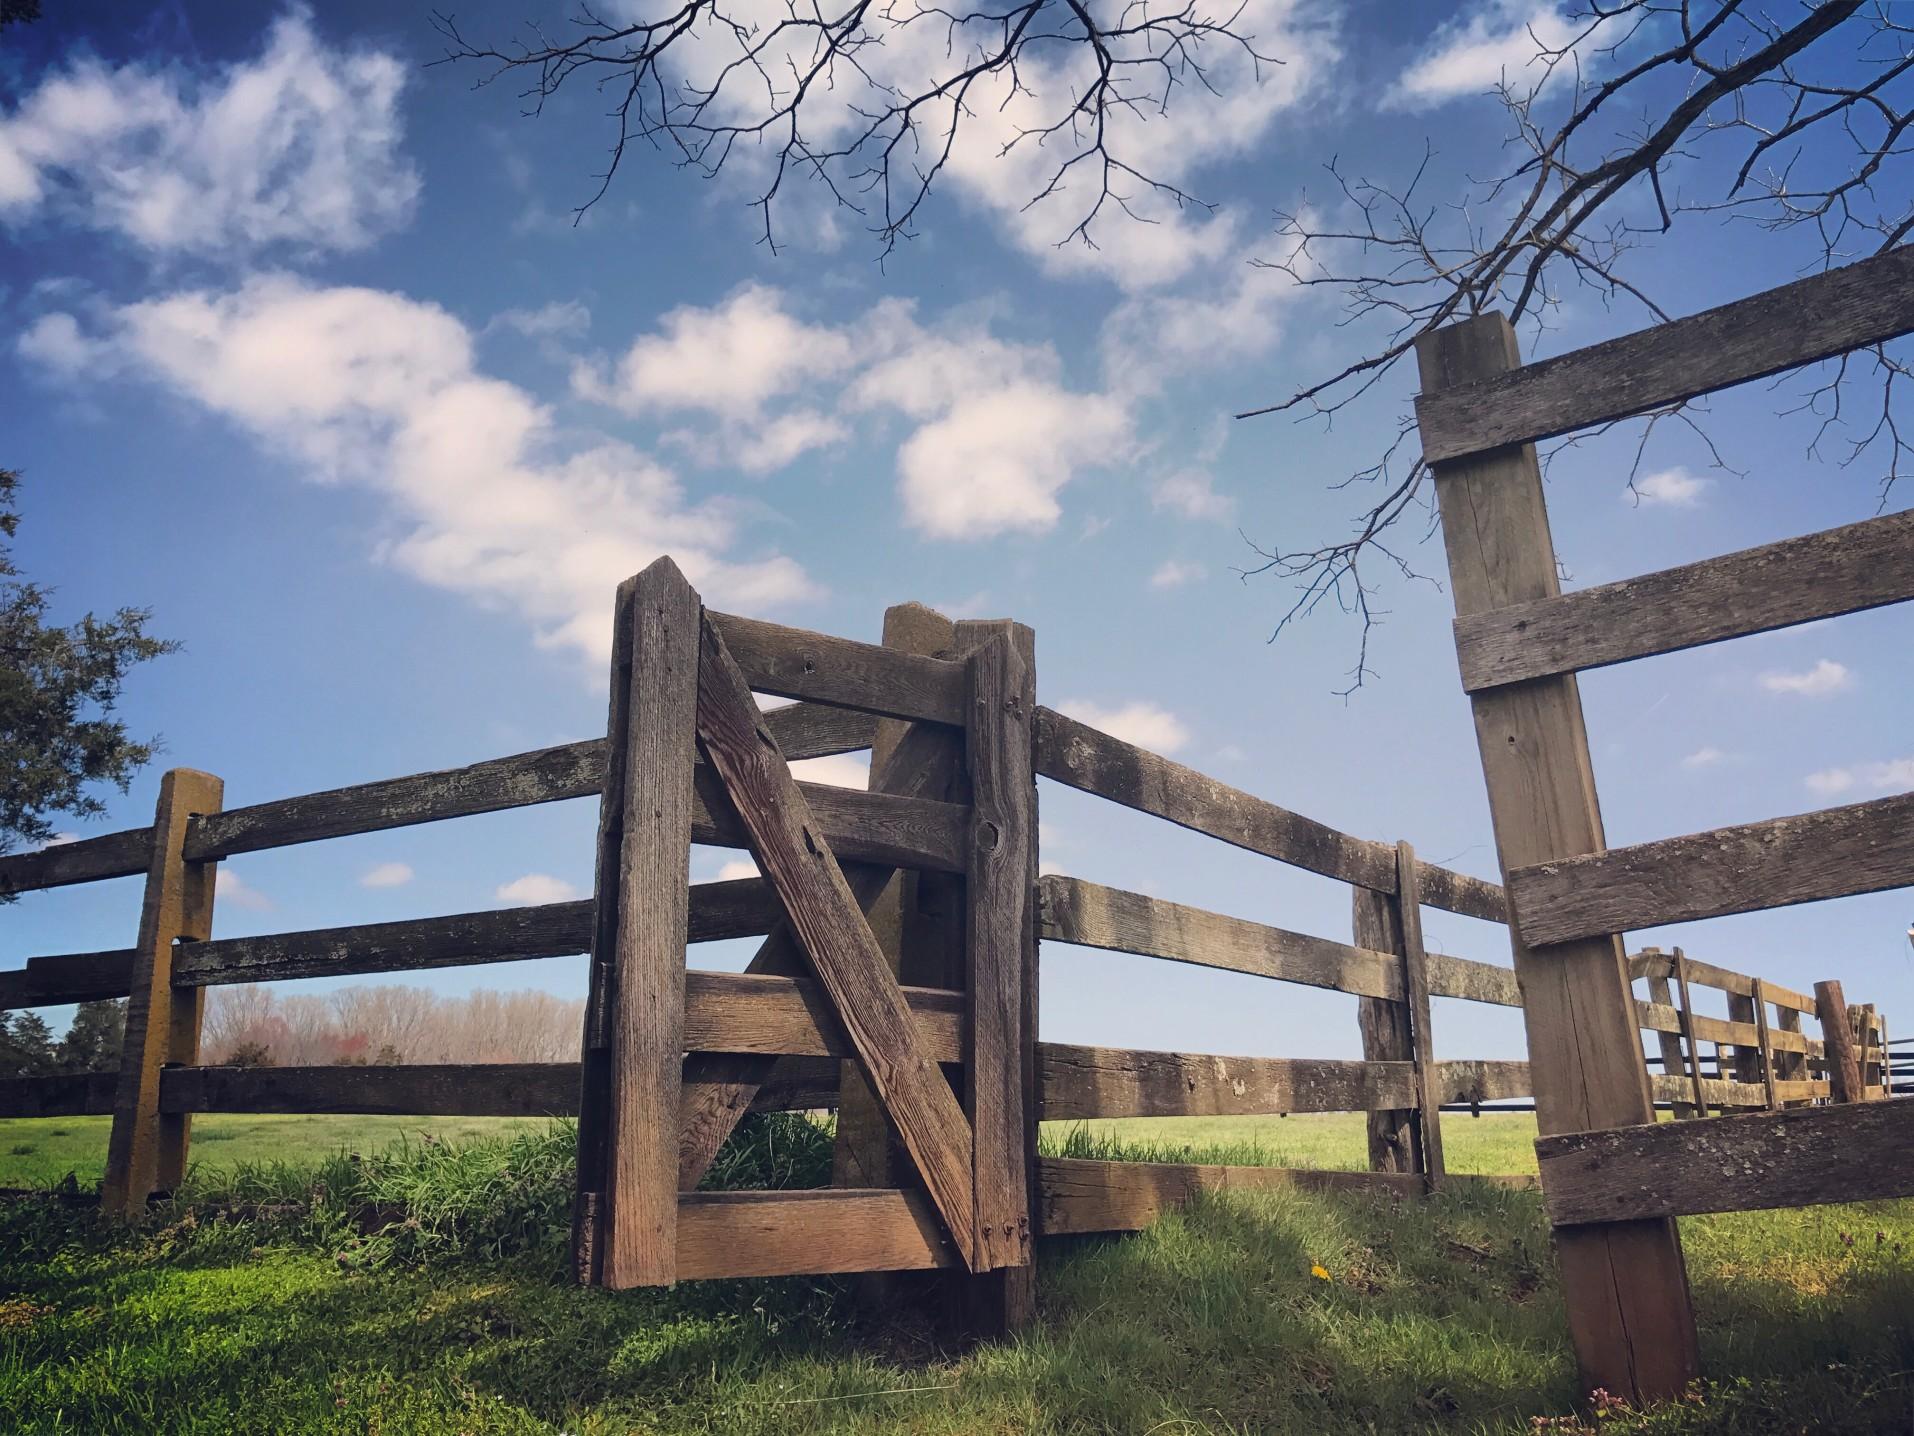 A simple lateral fence and gate against a blue sky